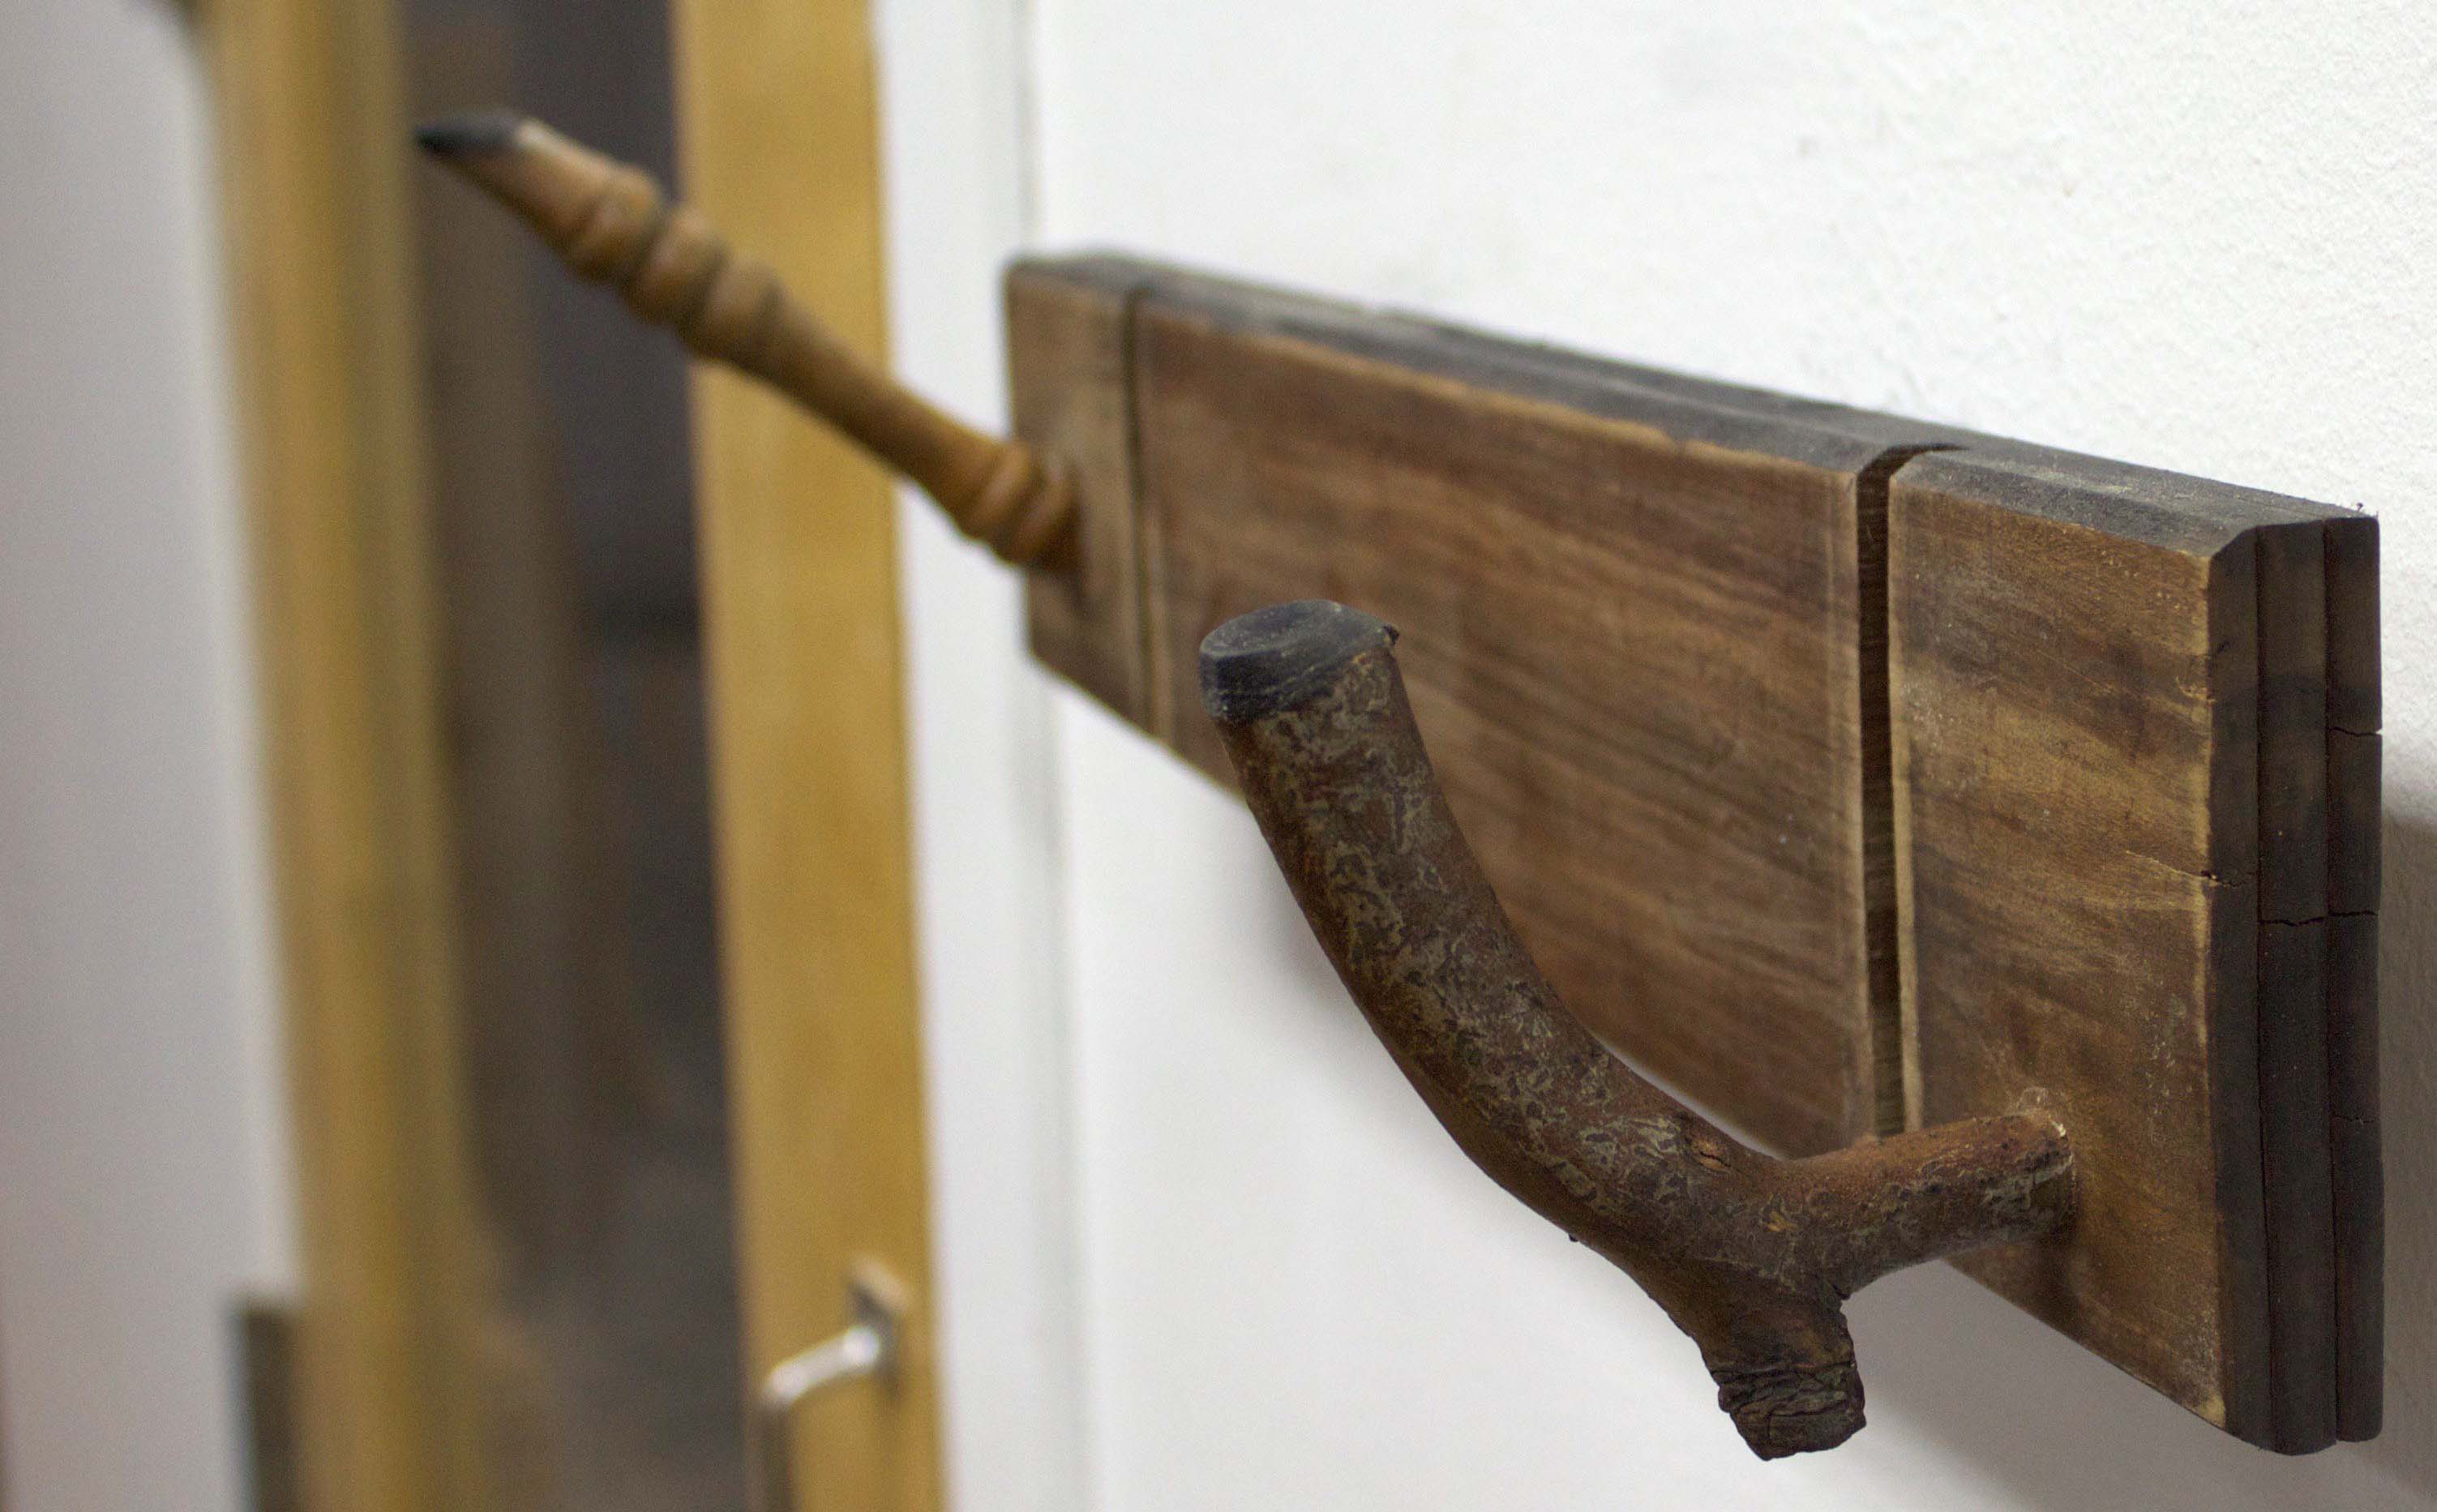 Make Handy Hooks from Upcycled Materials